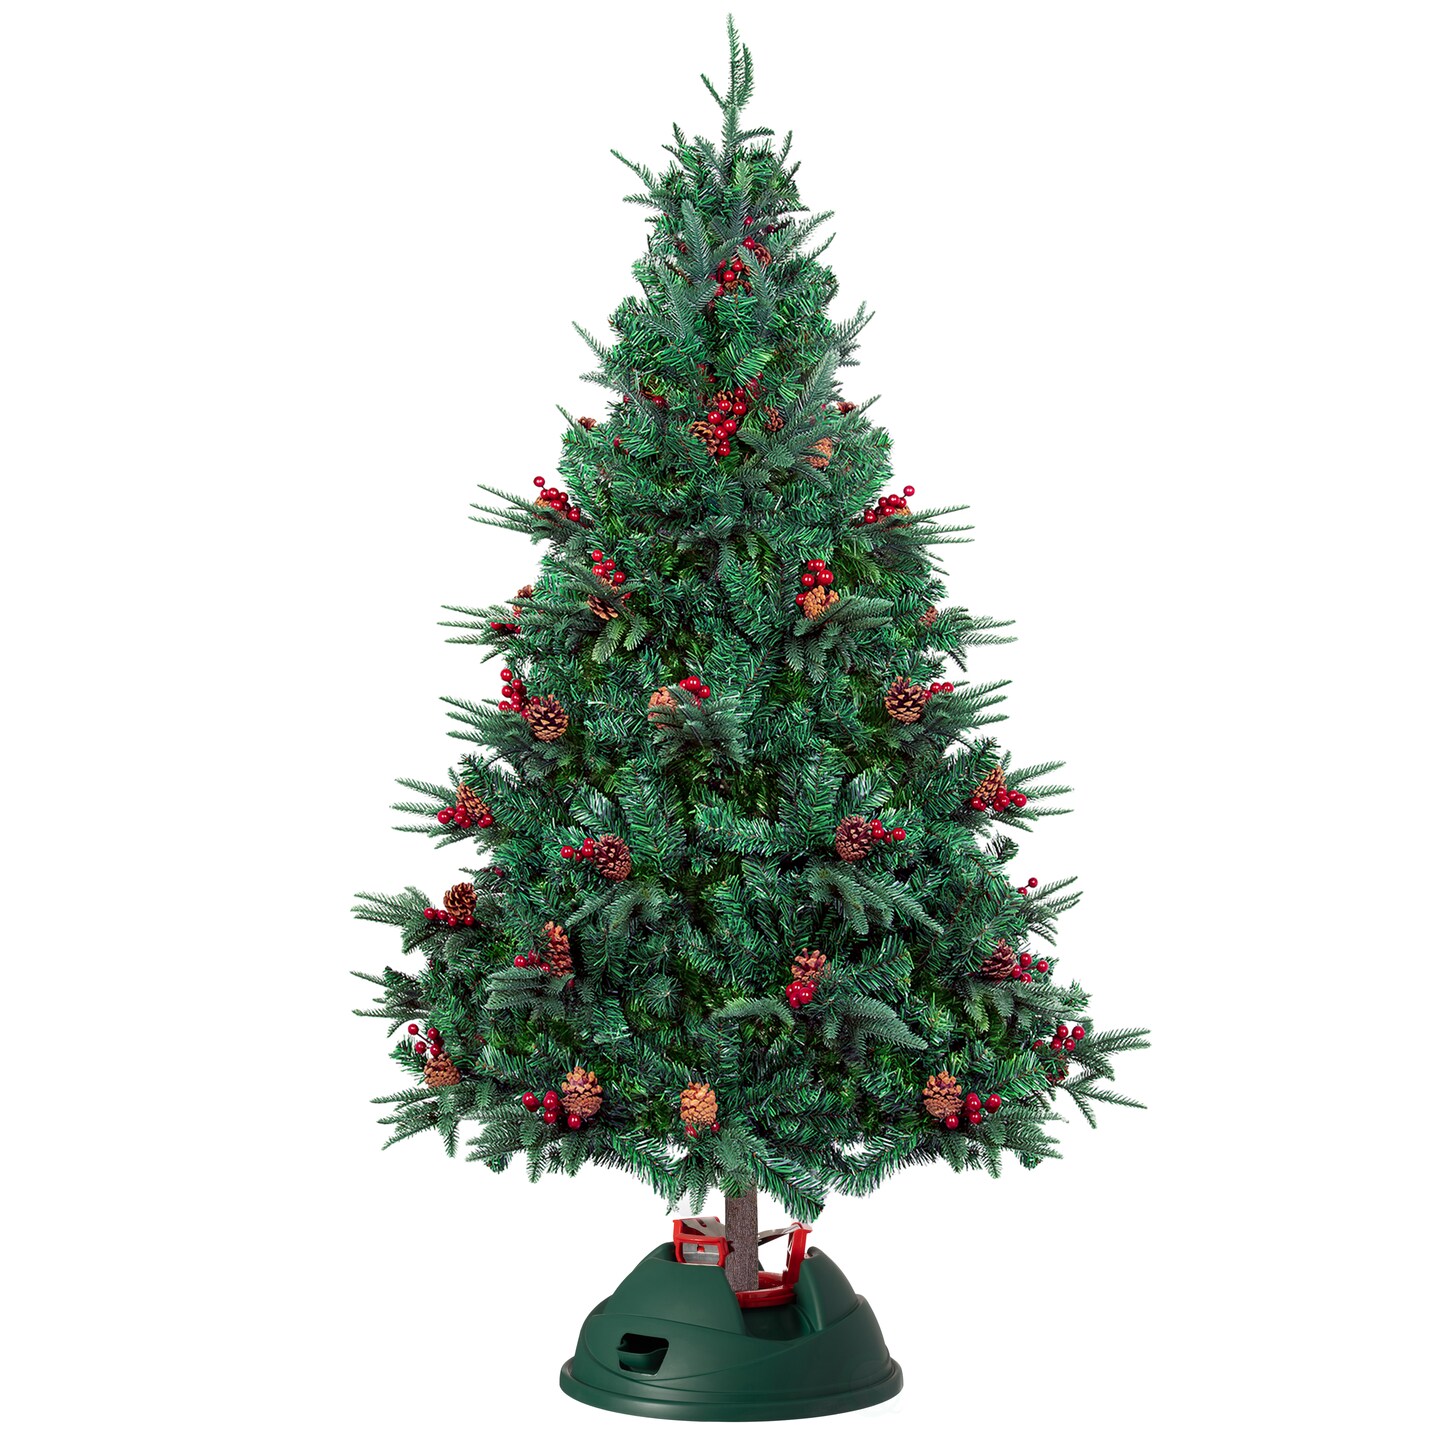 Indoor Automatic Green Christmas Tree Stand With Water Reservoir, Adjustable Metal Claws